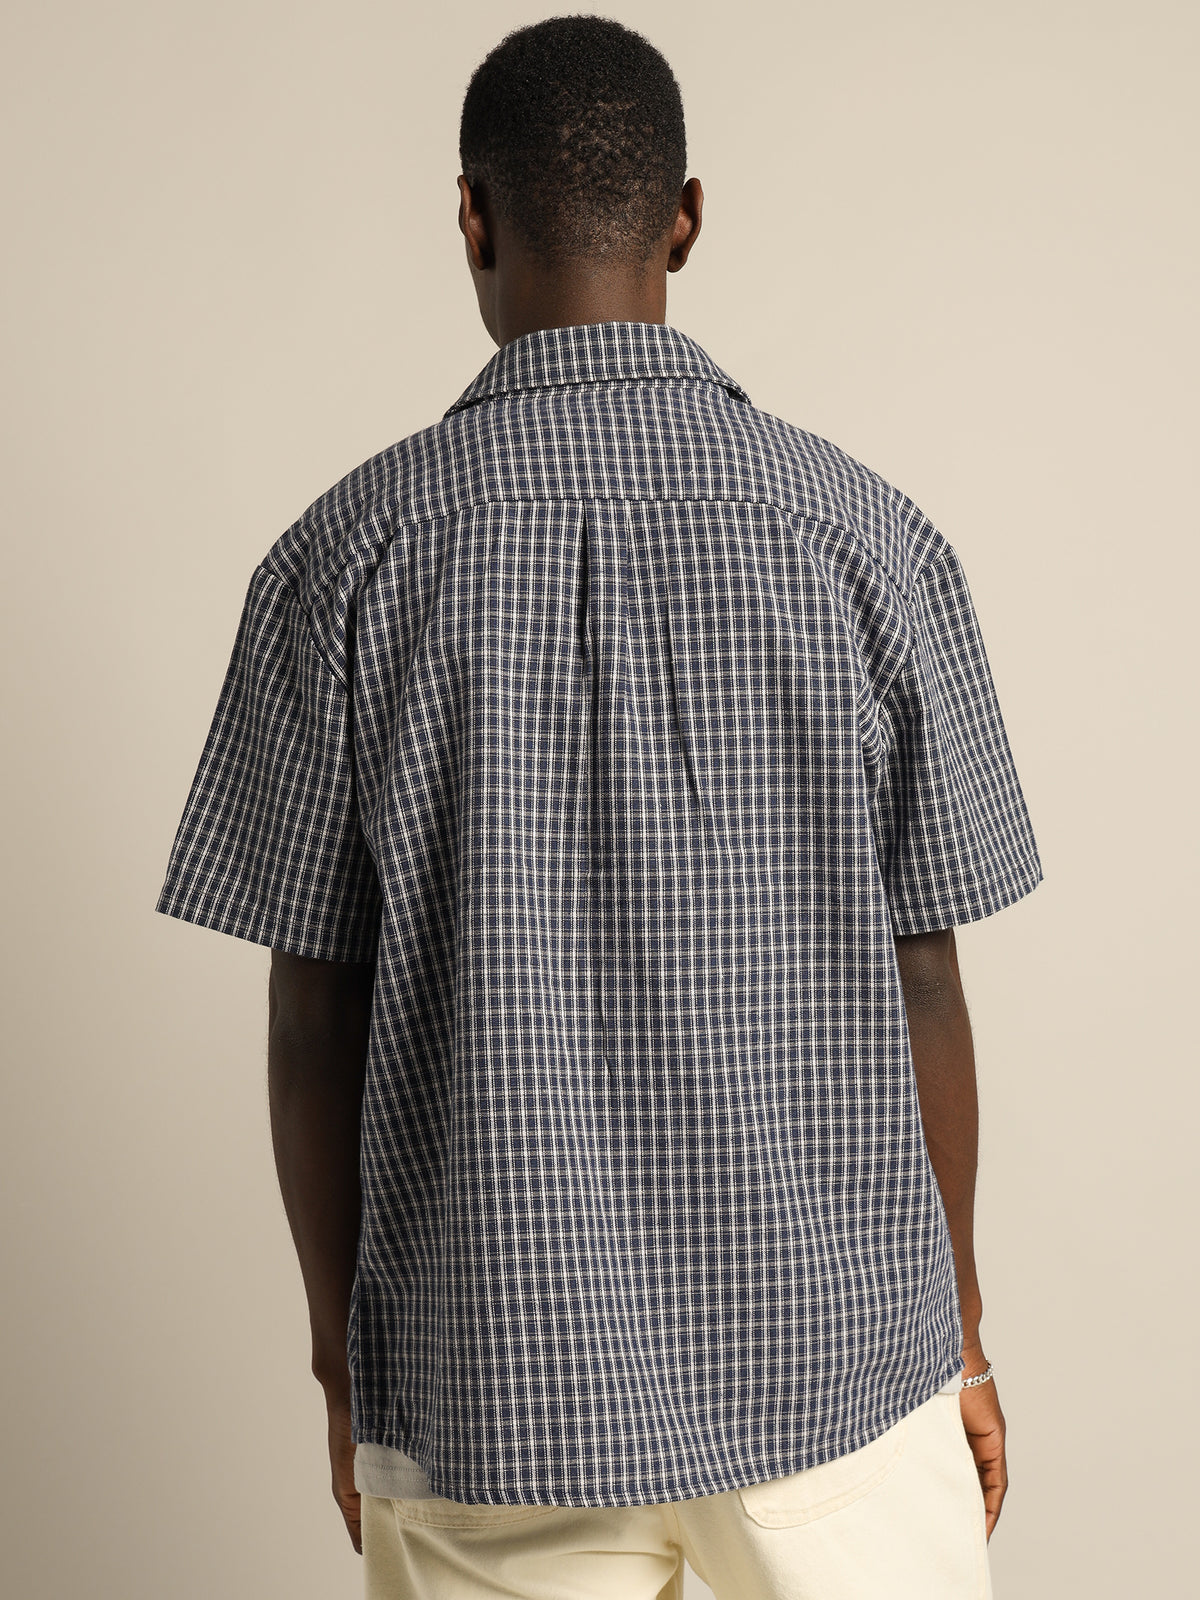 Button Up Check Shirt in Navy